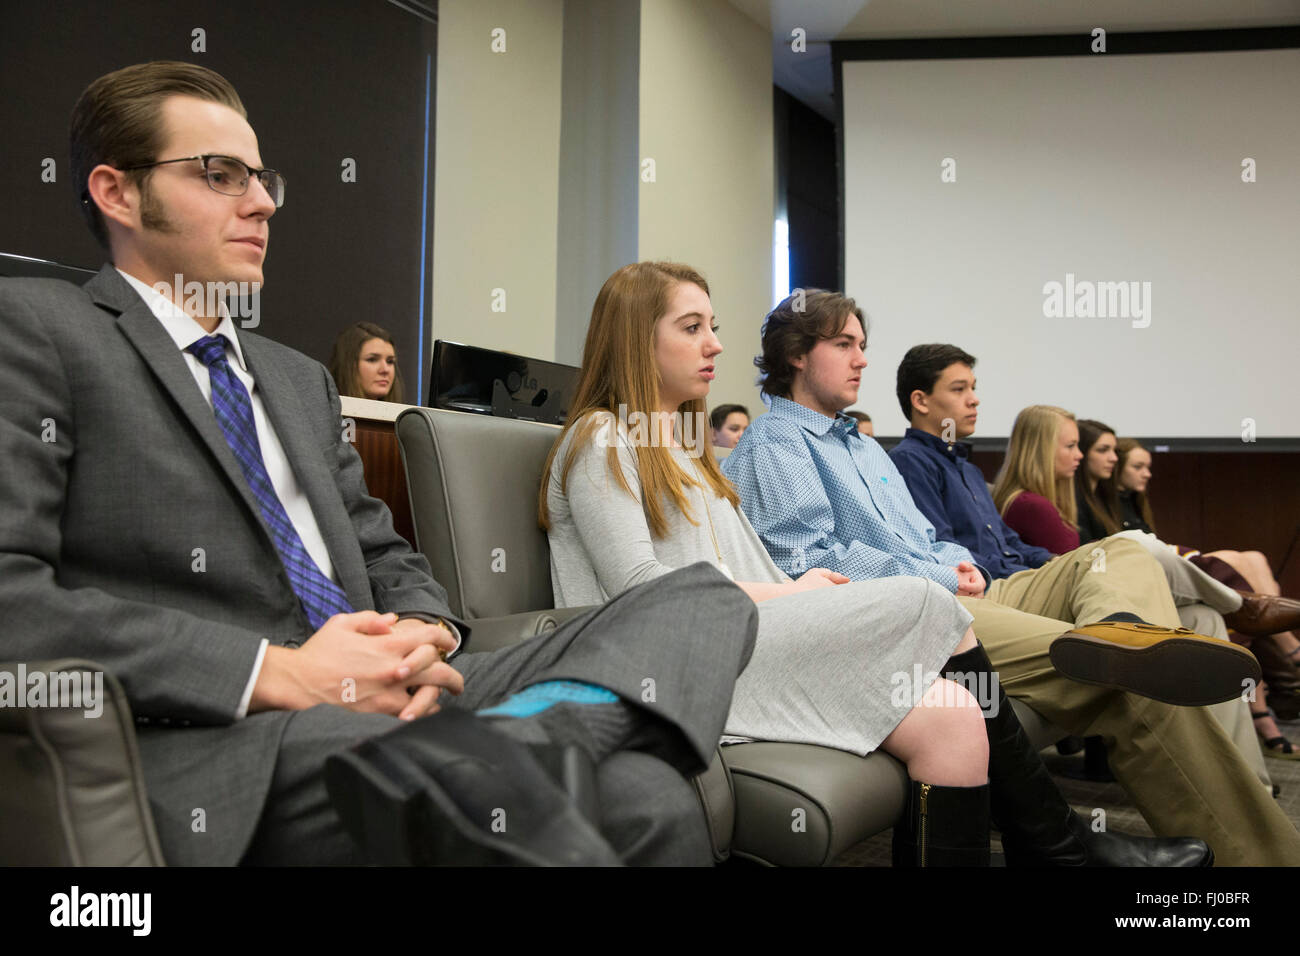 Teens posing as jurors listen to proceedings in county courtroom during mock trial for high school students in Texas Stock Photo